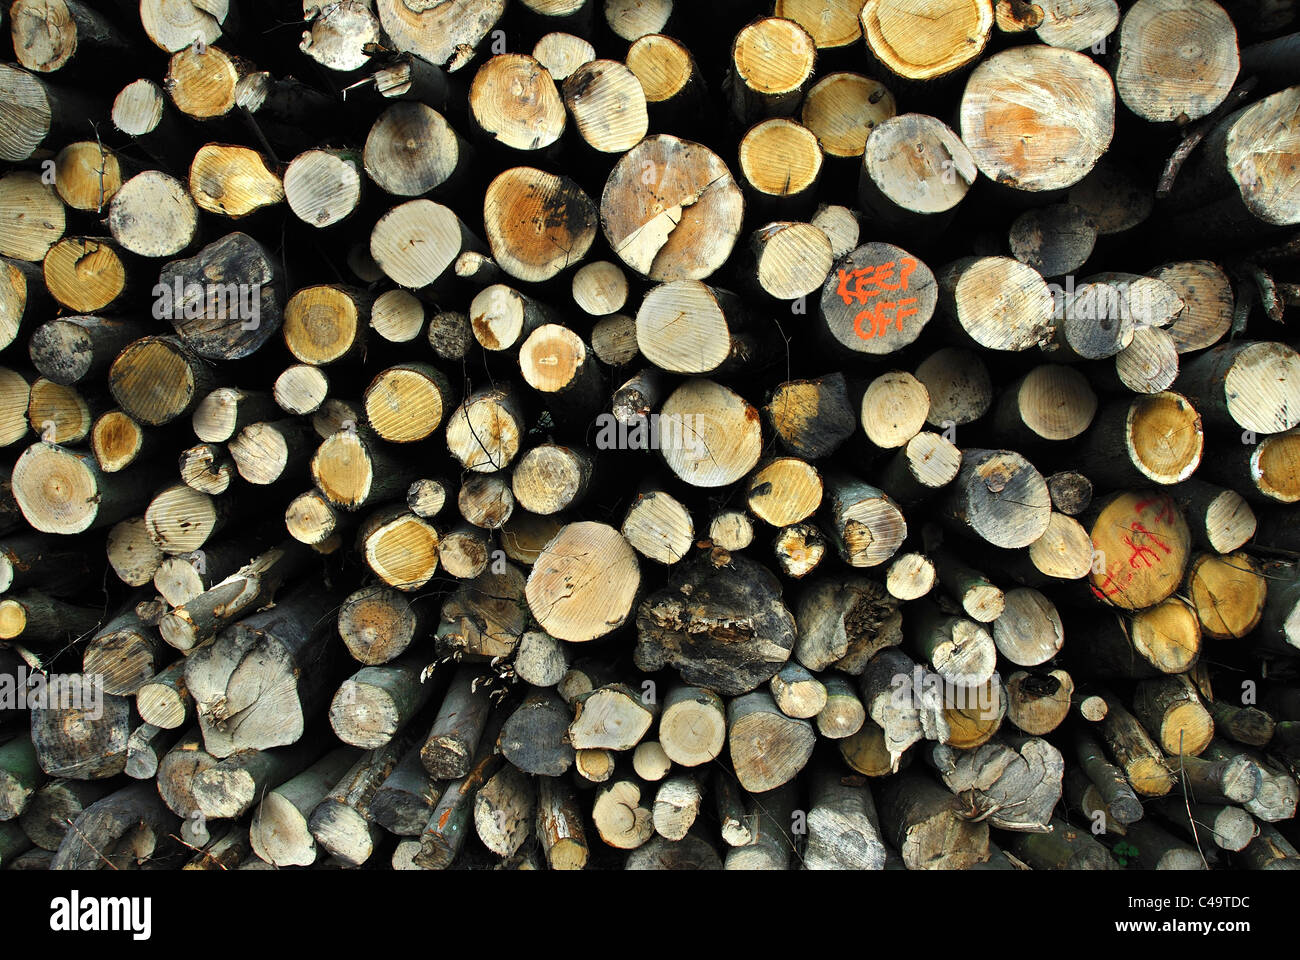 A stack of logs, a log pile UK Stock Photo